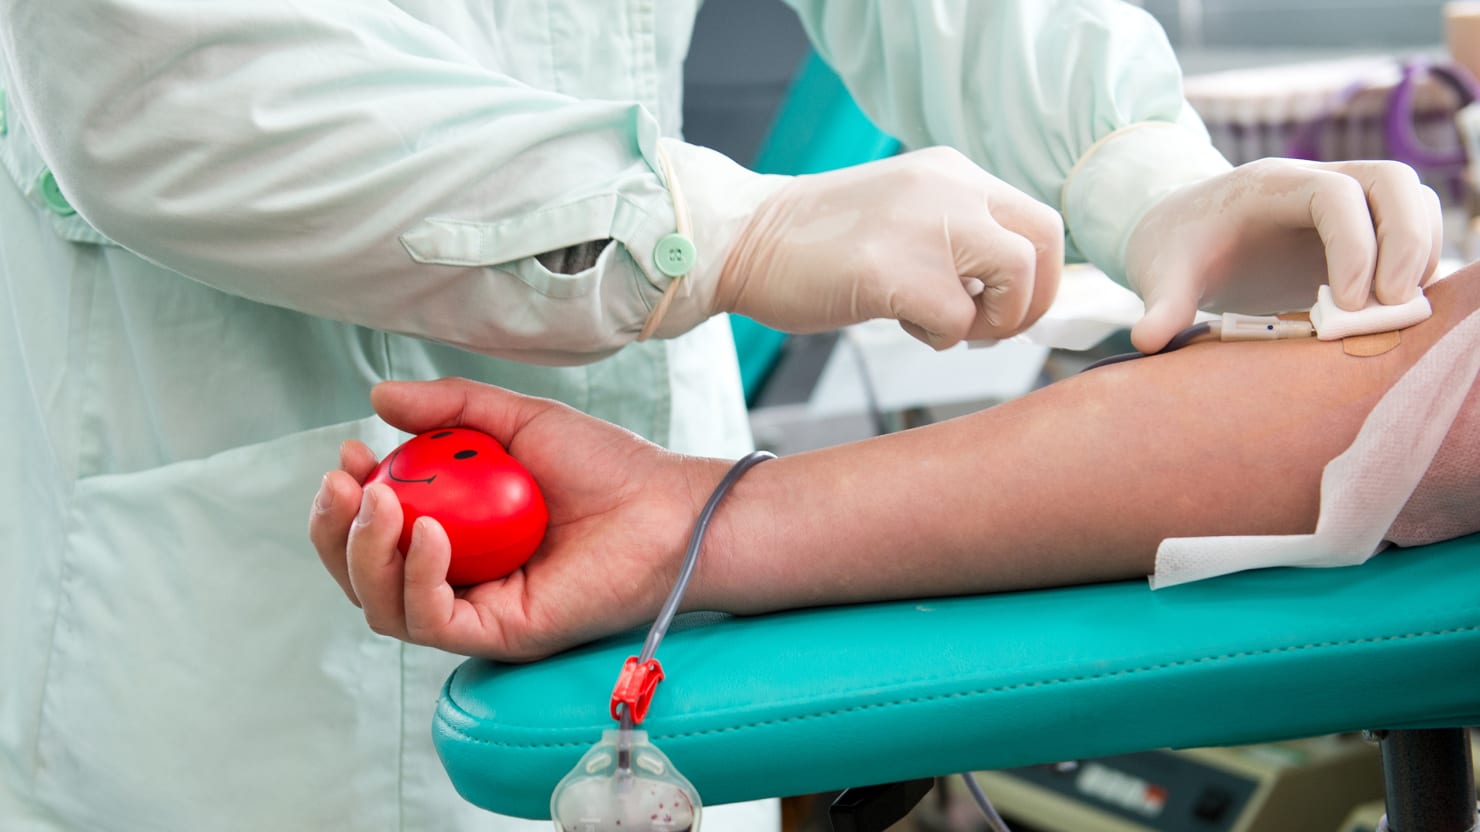 FDA’s Blood Donation Rules Out Trans People - 1480 x 832 jpeg 95kB